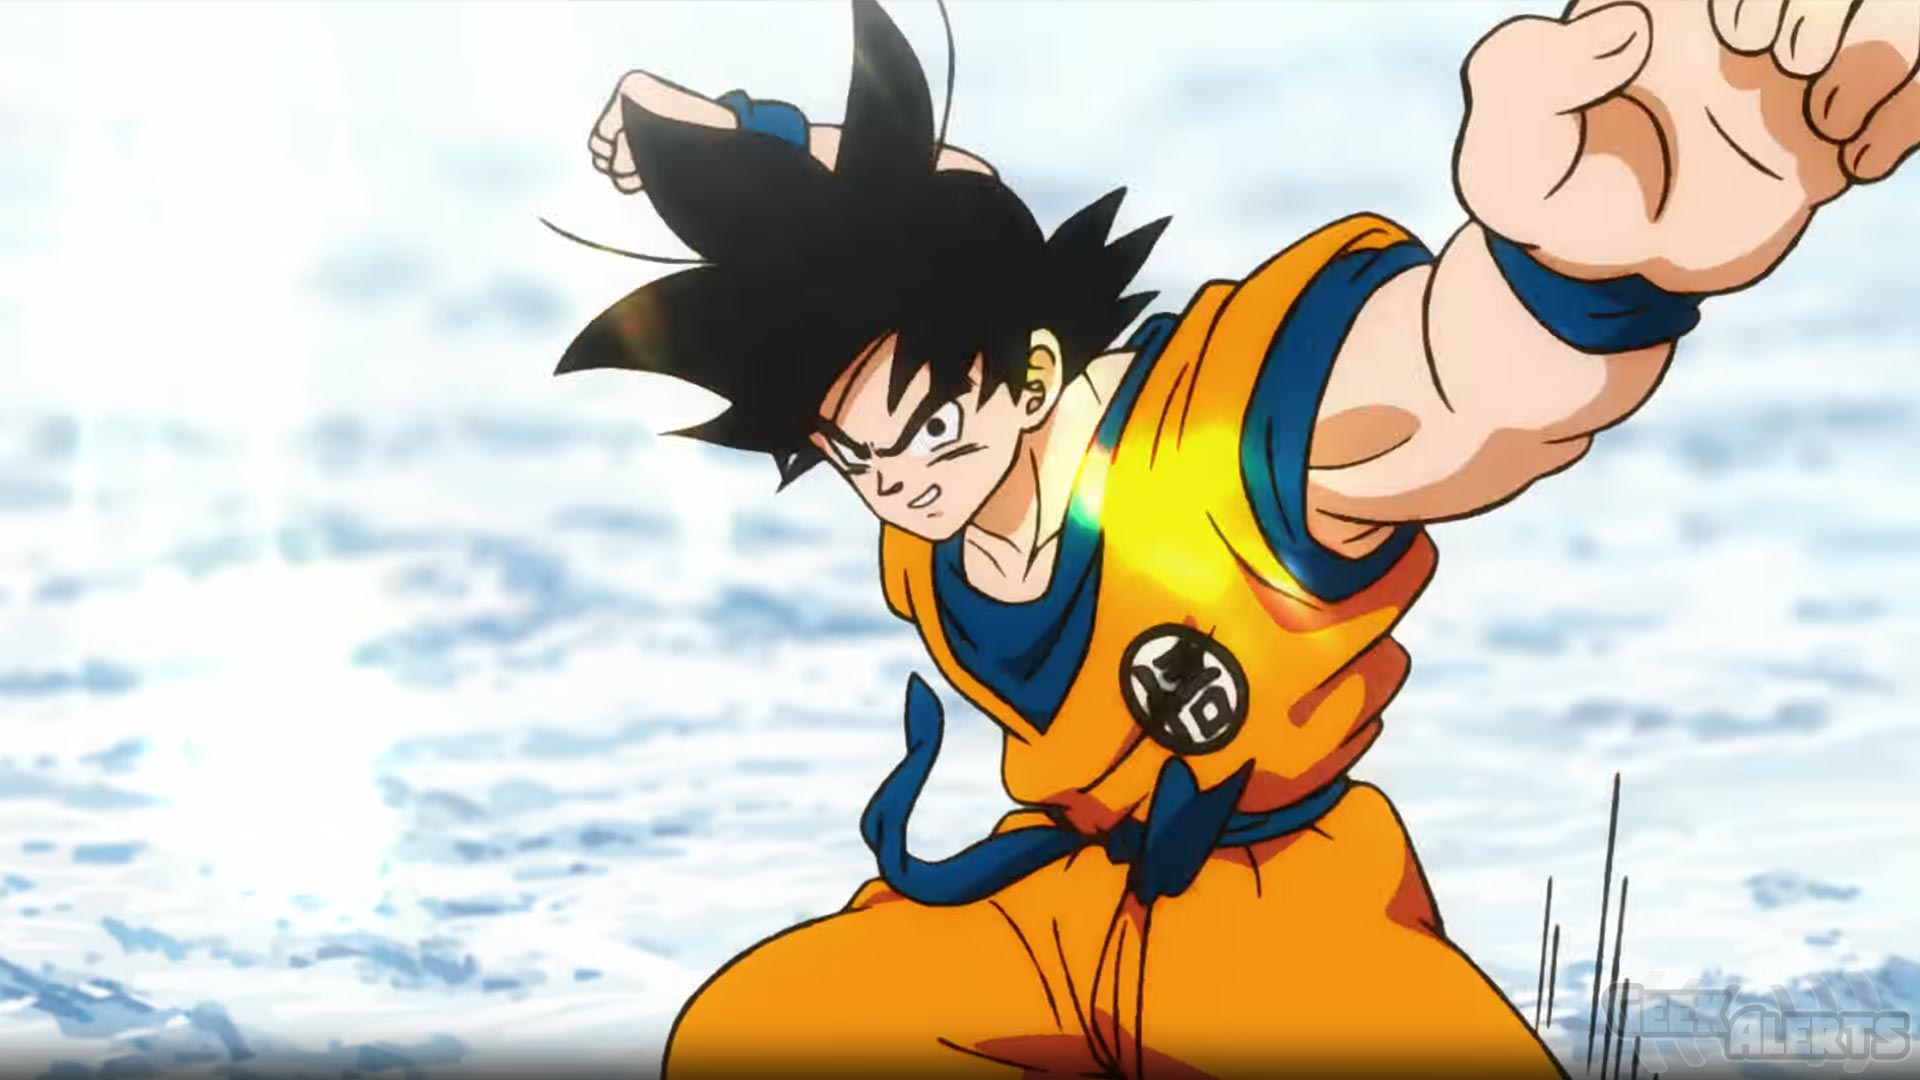 New Dragon Ball Super Movie in 2020 Confirmed   Exmanga